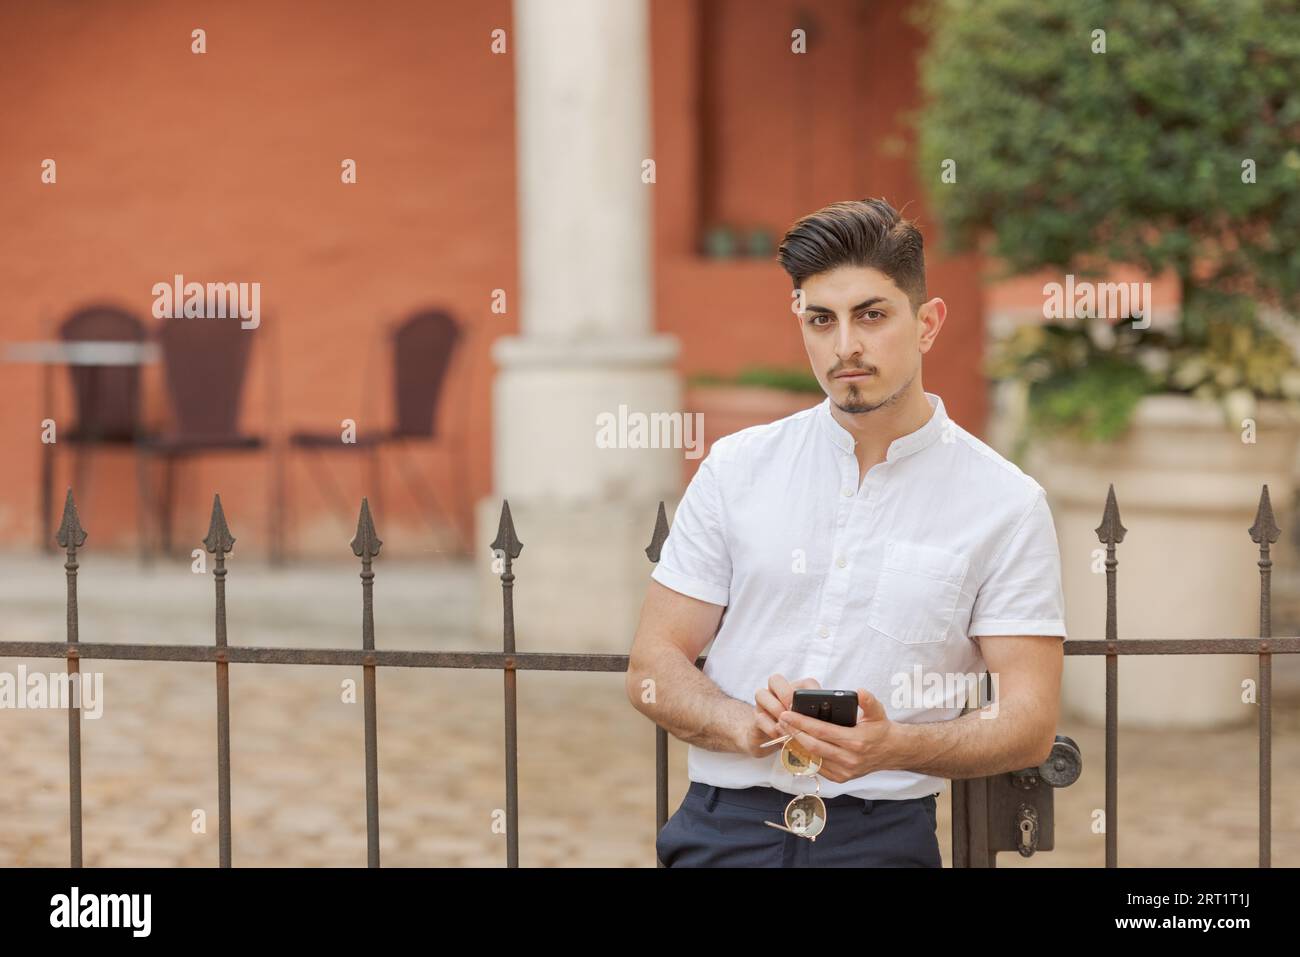 Young man with white short-sleeved shirt holding smartphone and glasses with both hands looking at camera in urban scene with mediterranean flair Stock Photo